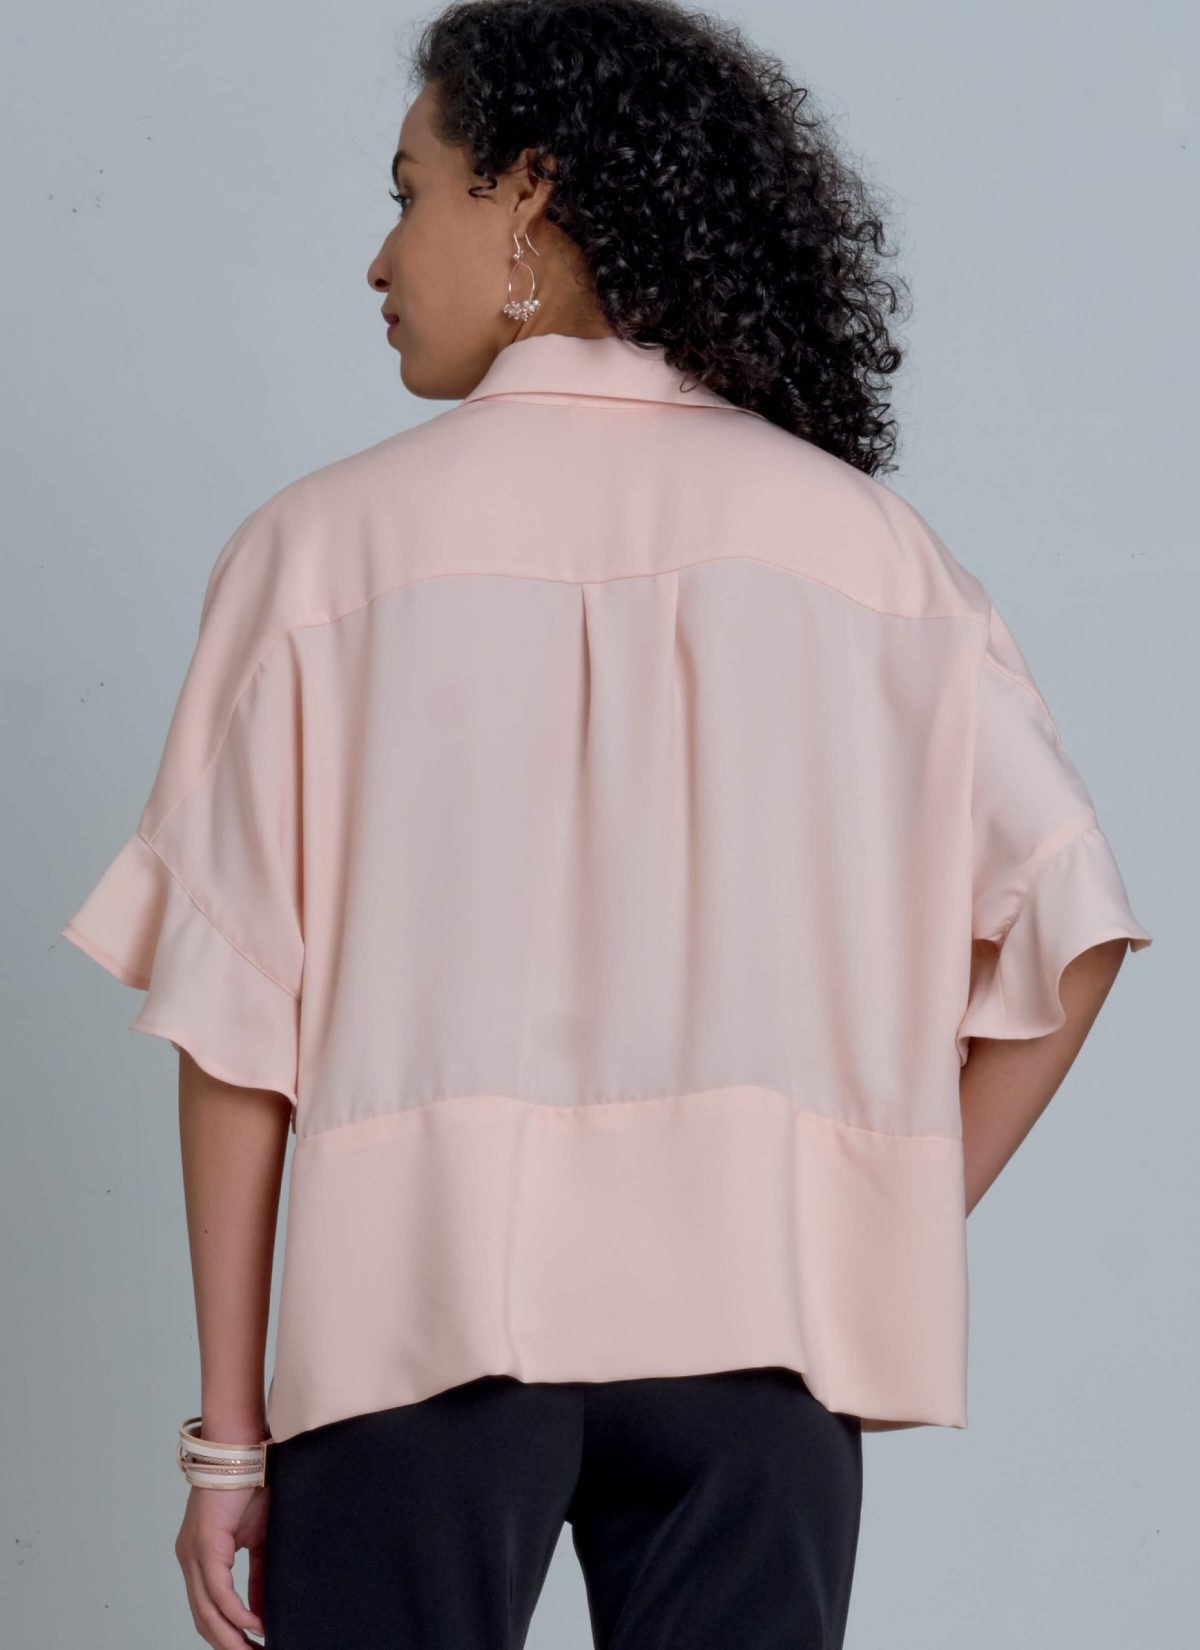 McCall’s Sewing Pattern M8001 Misses' Tops